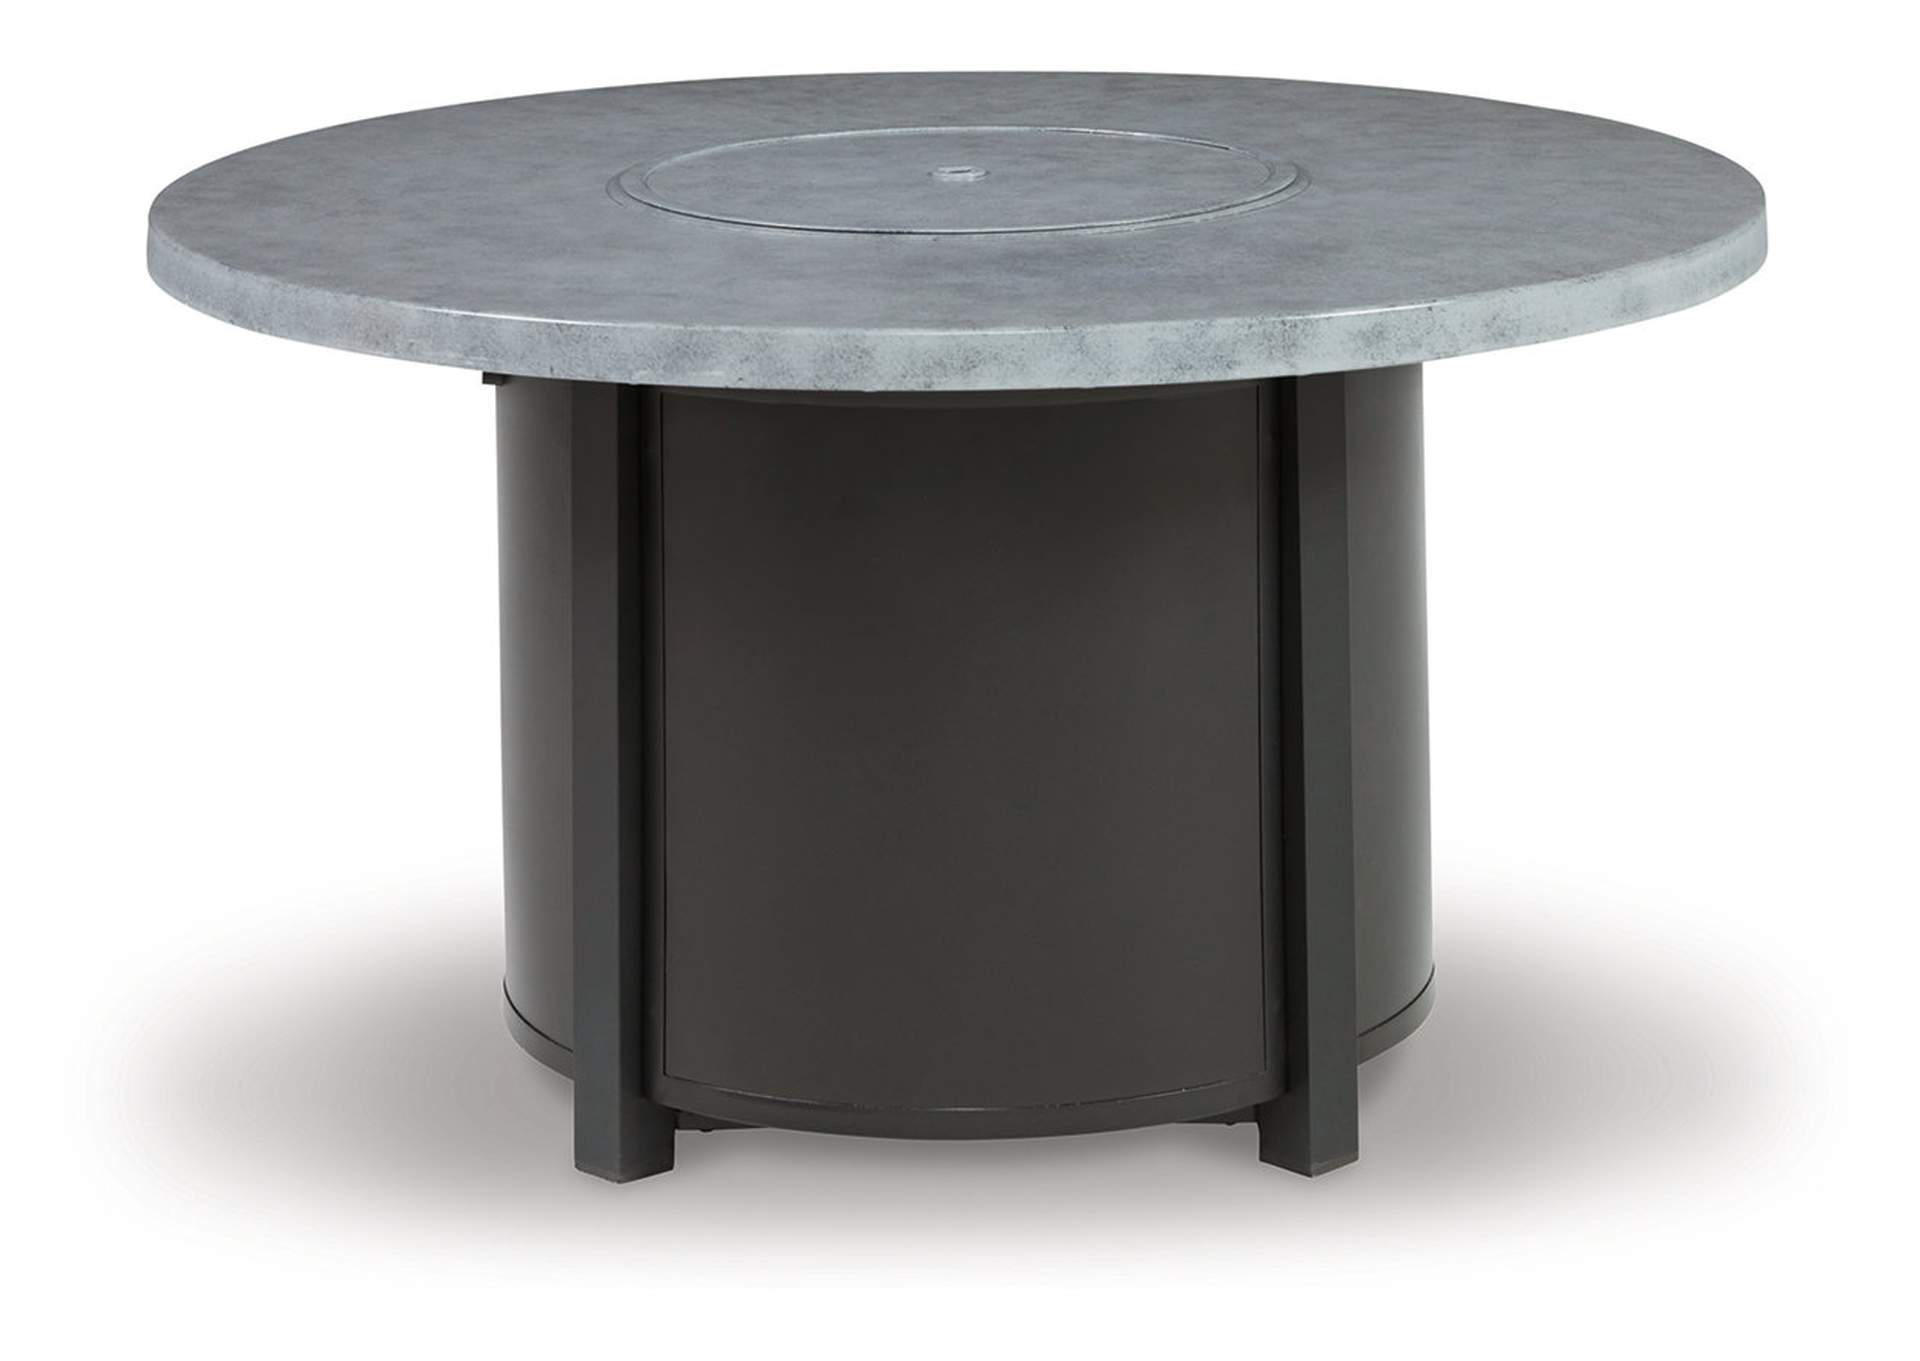 Coulee Mills Fire Pit Table,Outdoor By Ashley